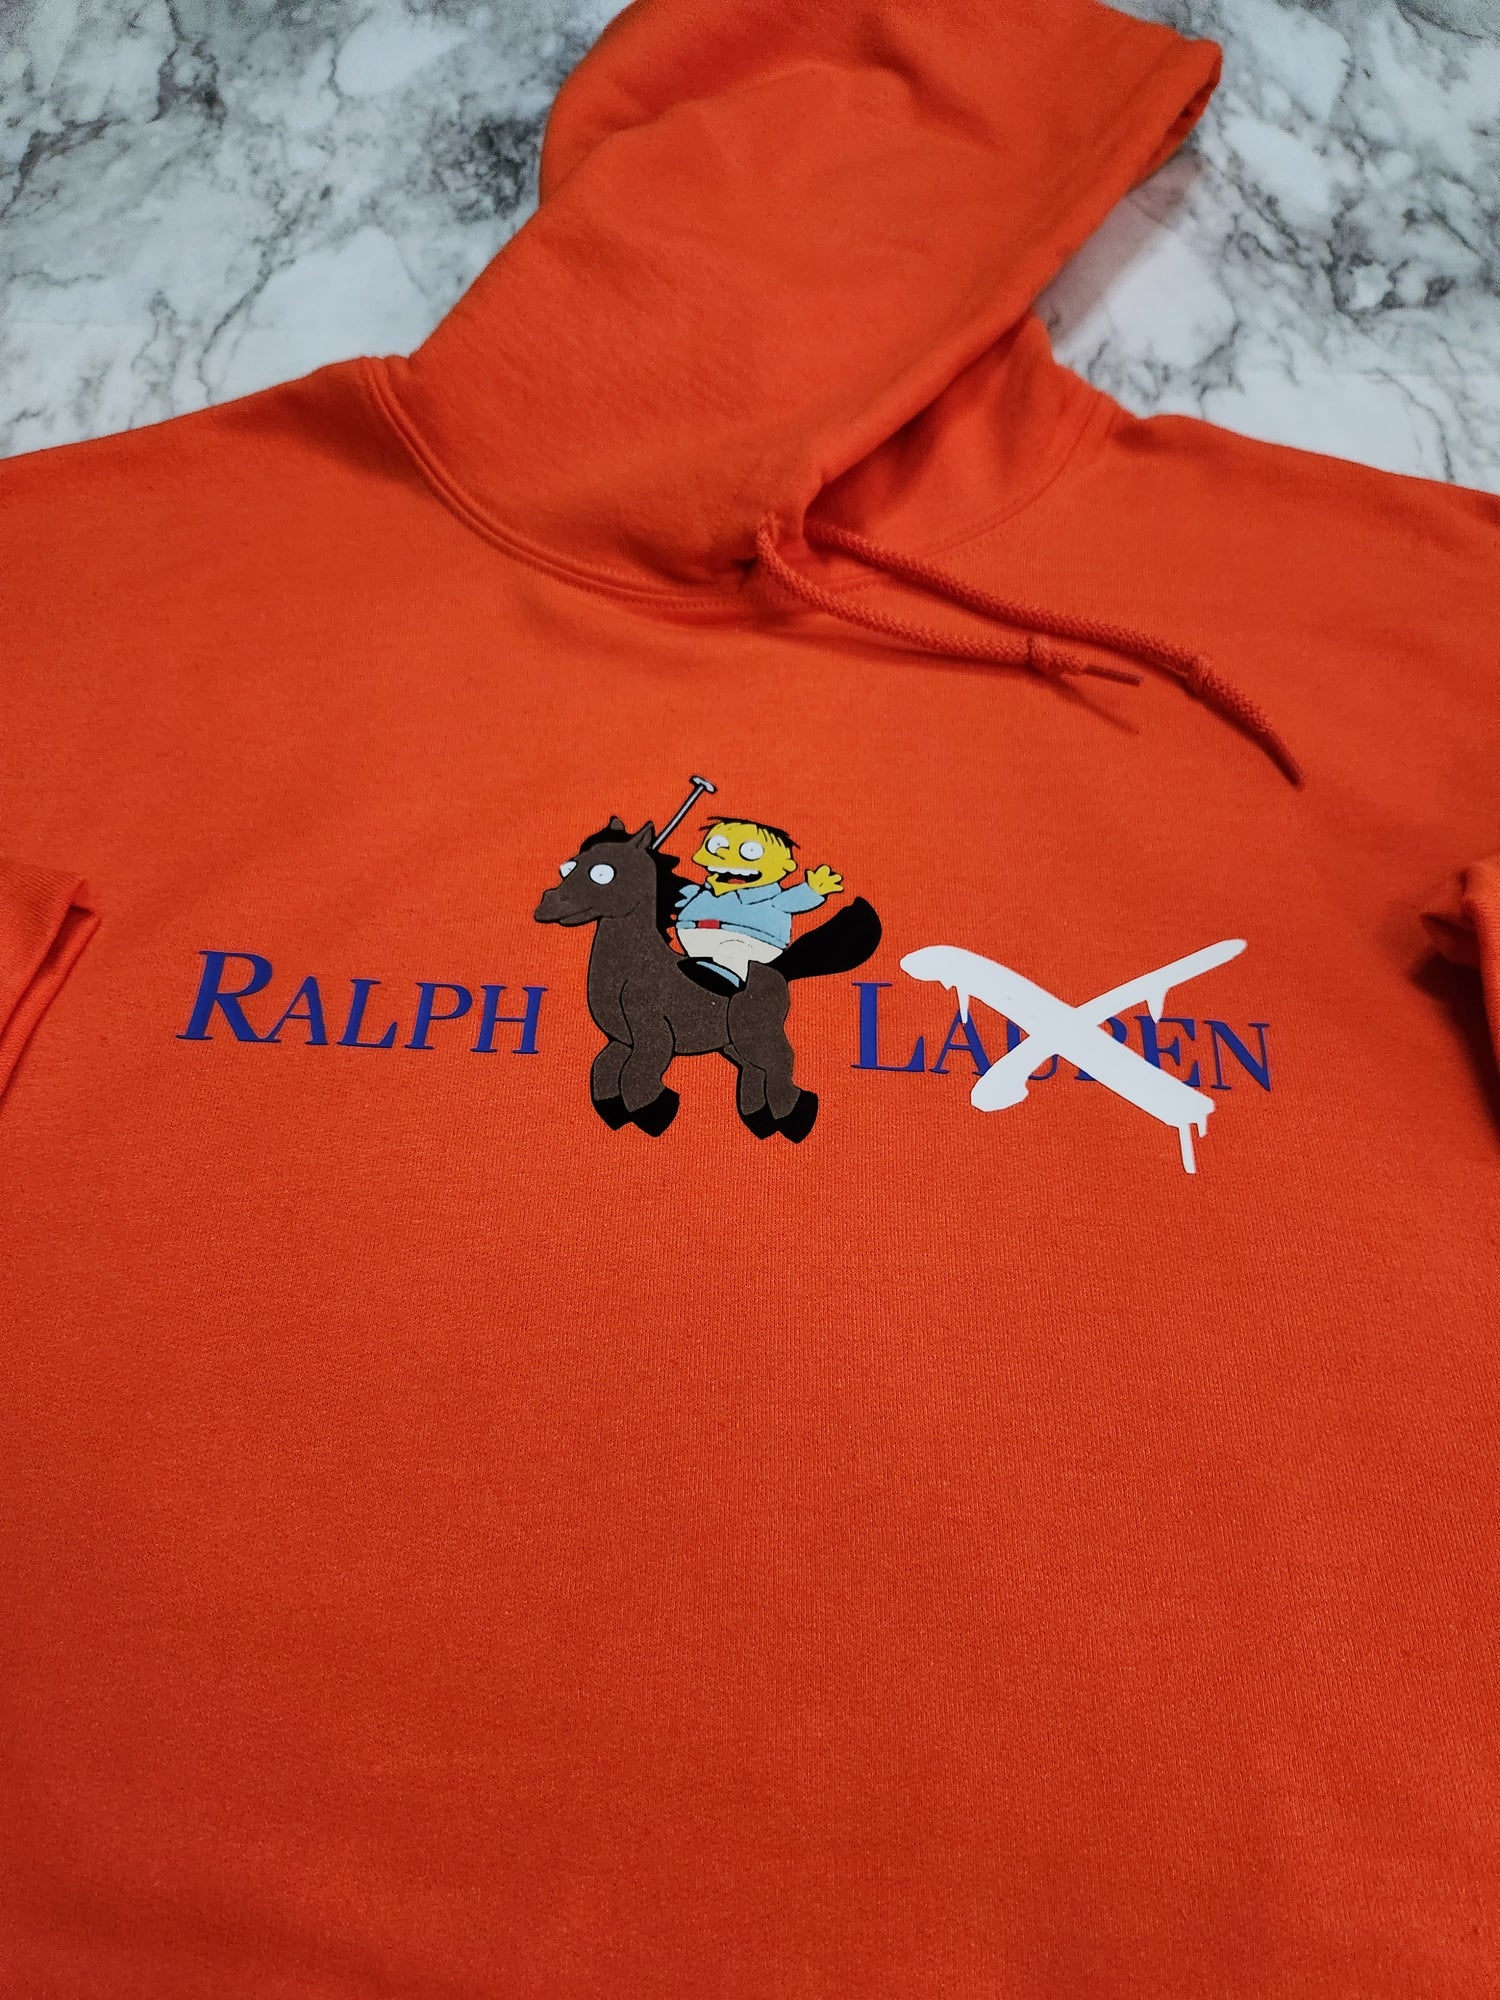 It Ain't Ralph Tho Hoodie - Centre Ave Clothing Co.